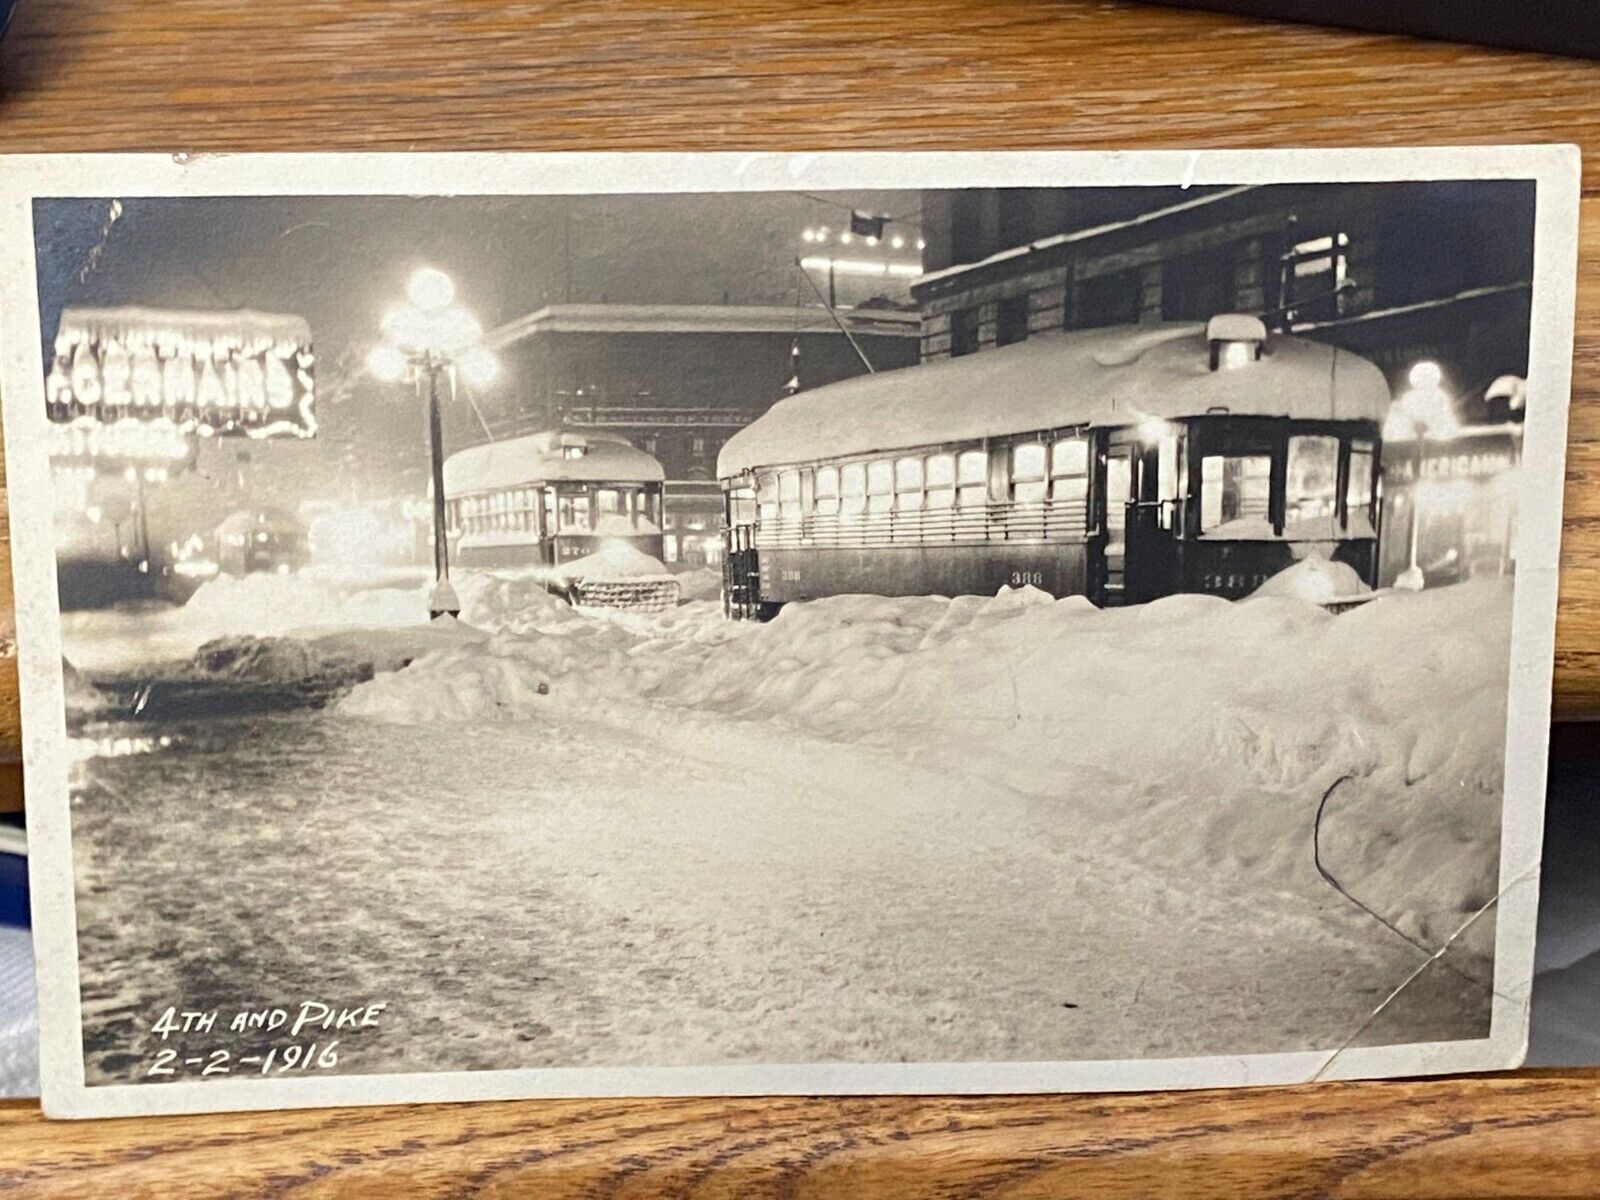 Seattle Snowstorm 2/2/1916 (4TH AND PIKE) Trolley Postcard RPPC *Pre Owed* US3